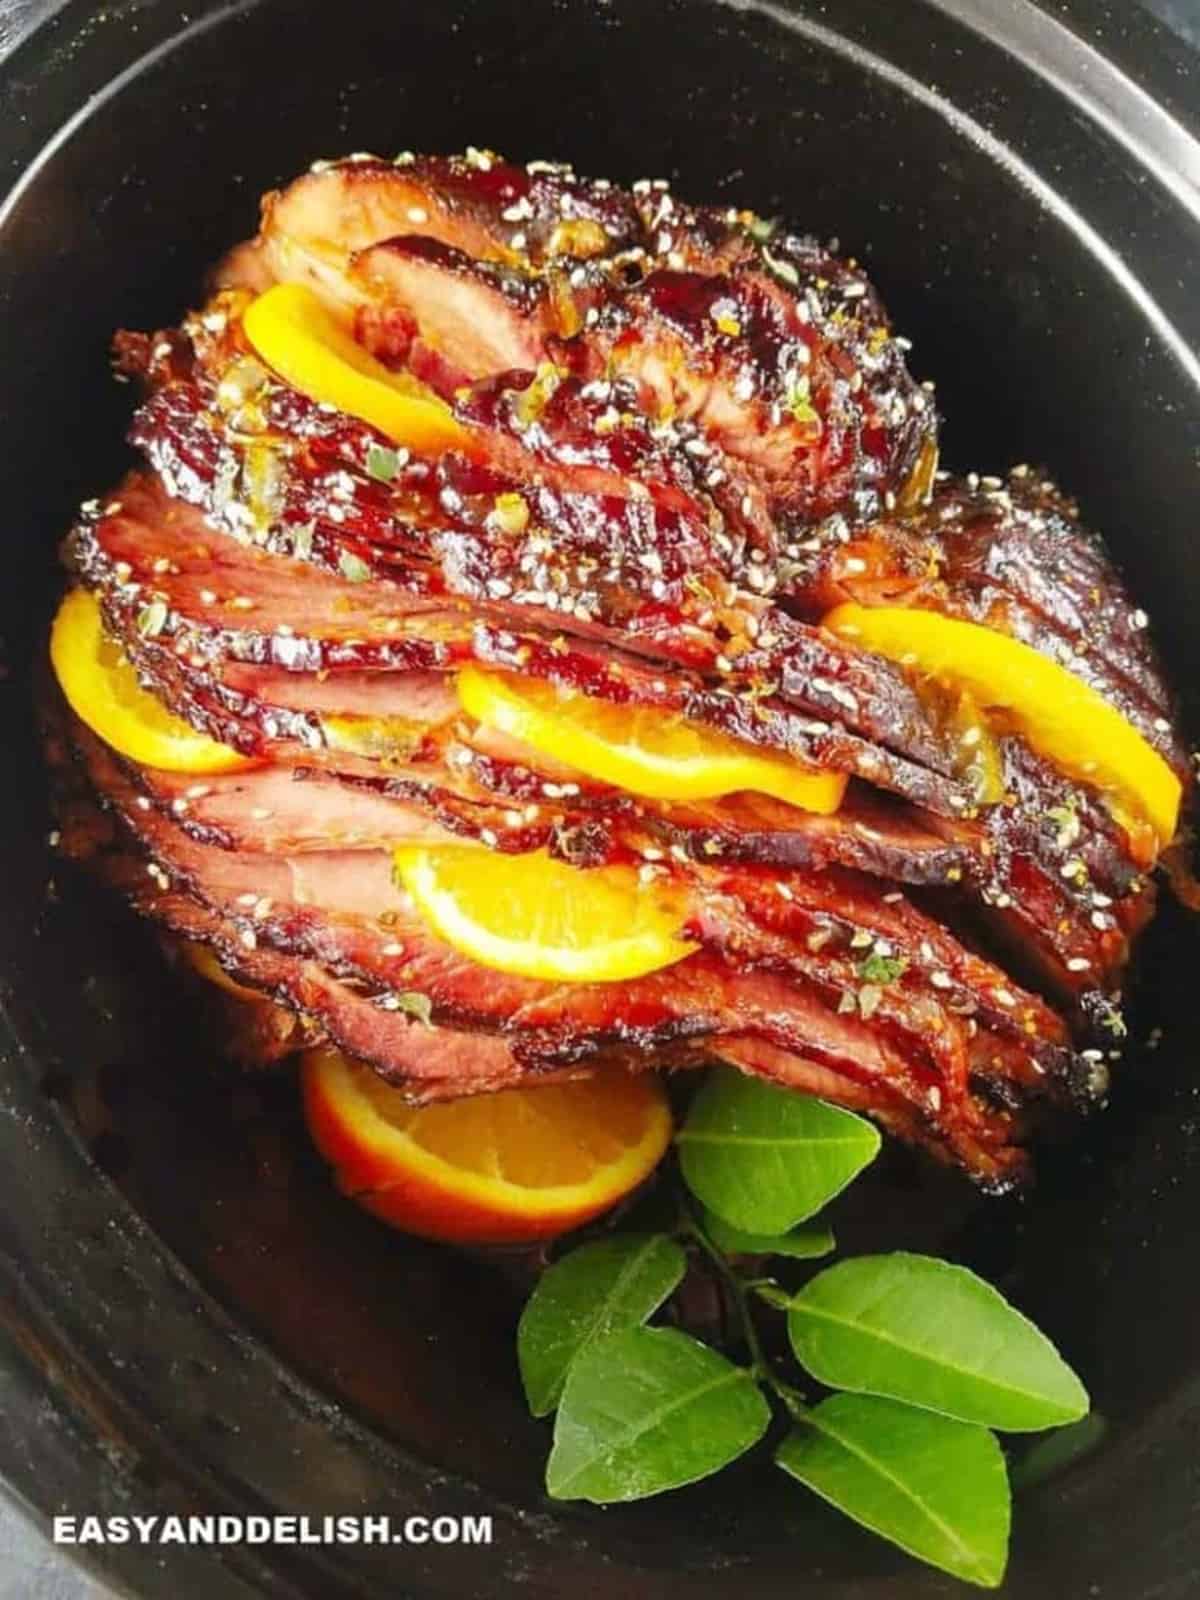 Spiral ham in a slow cooker garnished with orange slices and leaves.